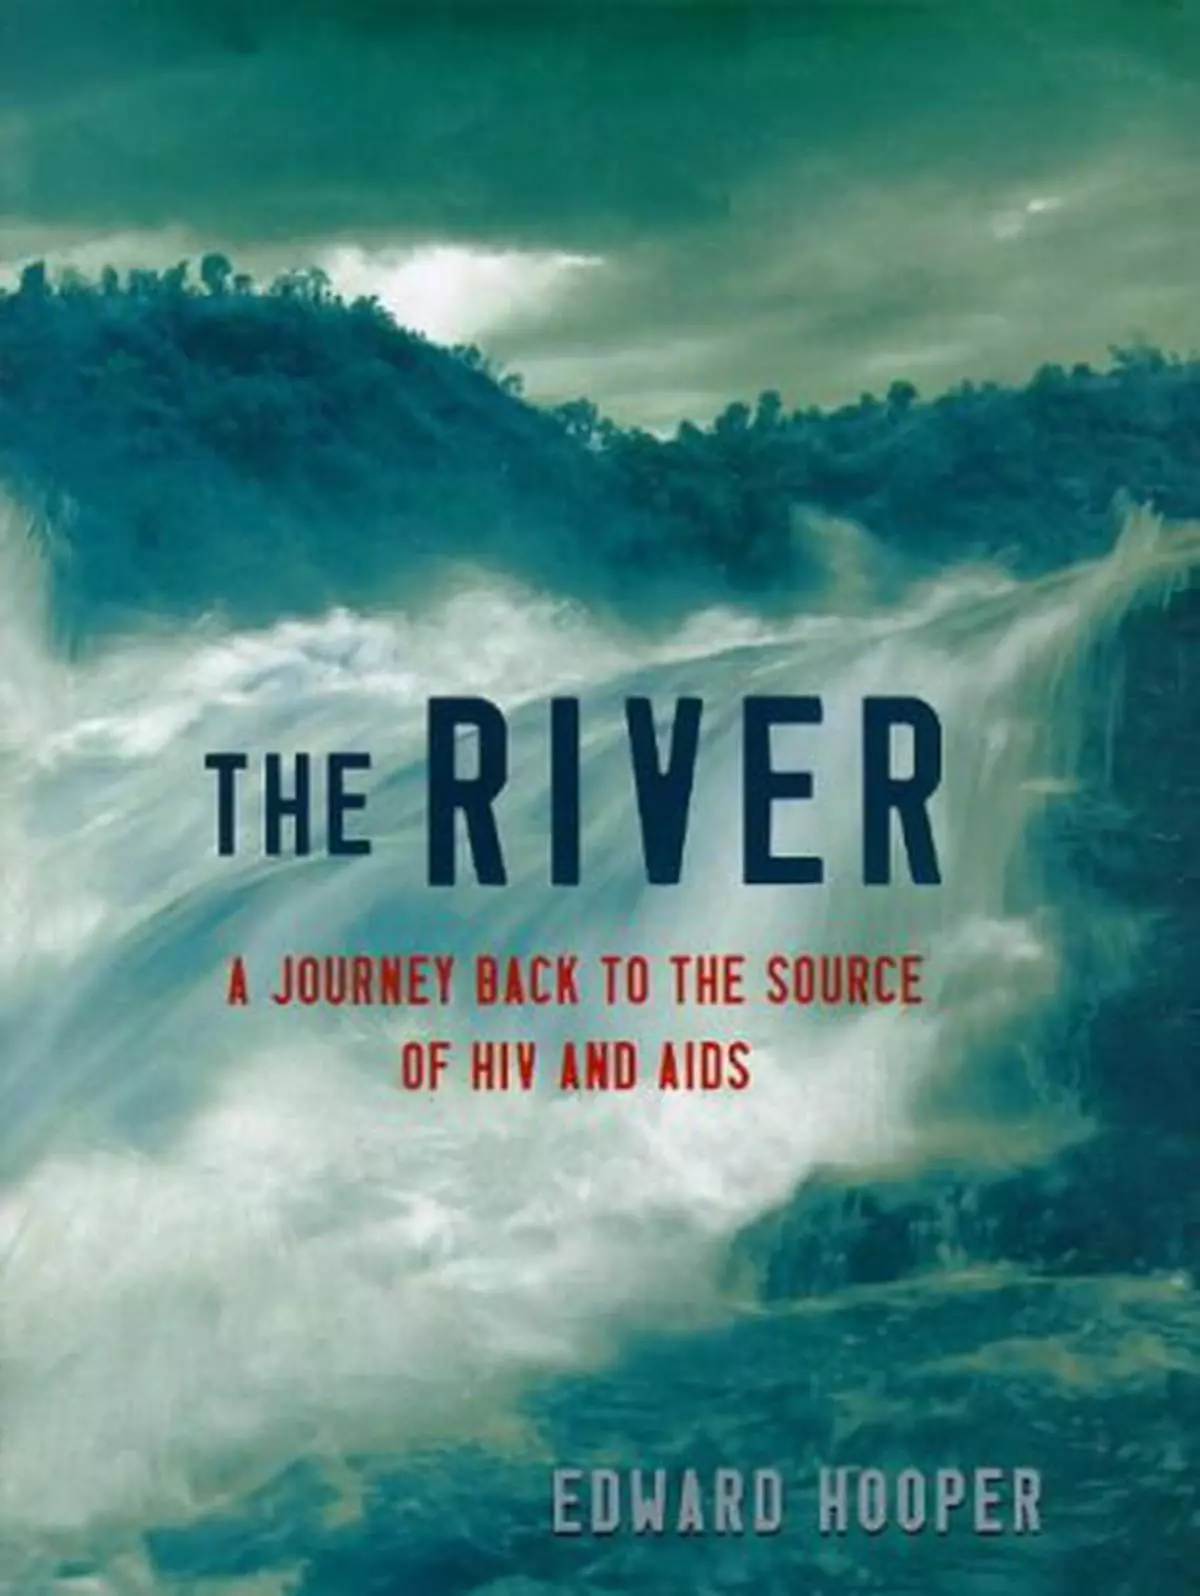 In The River, the author Edward Hooper argues that HIV did not arise naturally but was a man-made disaster caused by trials of an oral polio vaccine in Central Africa in the 1950s.